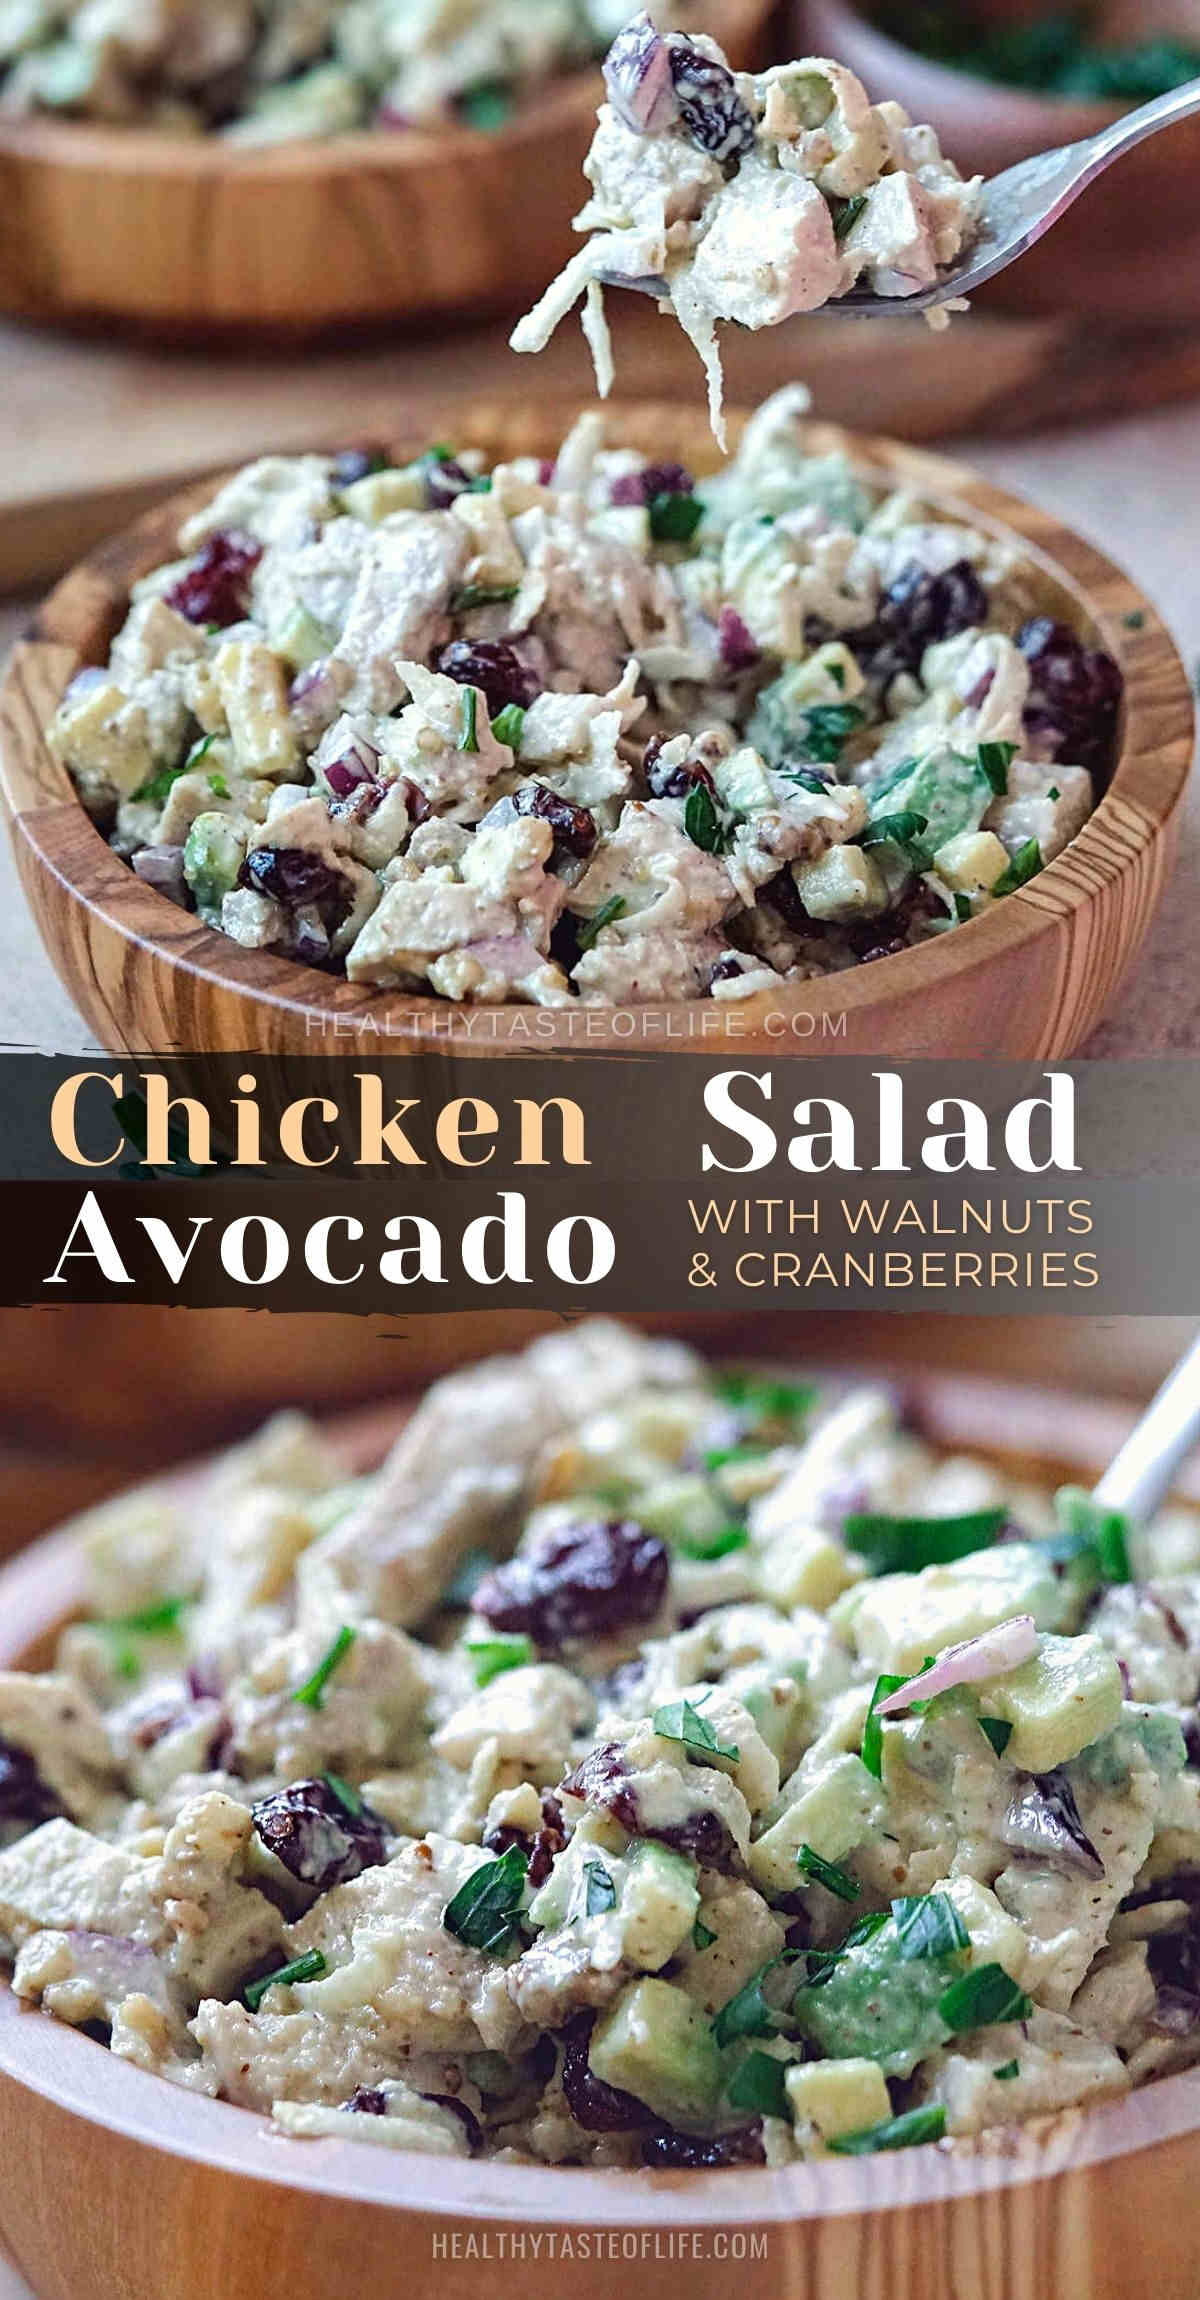 Healthy cranberry chicken walnut salad with avocado and celery root recipe. This easy chicken salad uses simple ingredients like cooked chicken breast, avocado, cranberries, walnuts (or pecans) and celery root tossed with creamy mayonnaise or avocado dressing. An easy cranberry walnut chicken salad with avocado that can be made in advance and serves as side dish, lunch, dinner, holiday gatherings and putlocks. #chickensalad #cranberry #walnut #healthy #celery #avocado #pecan #saladrecipe